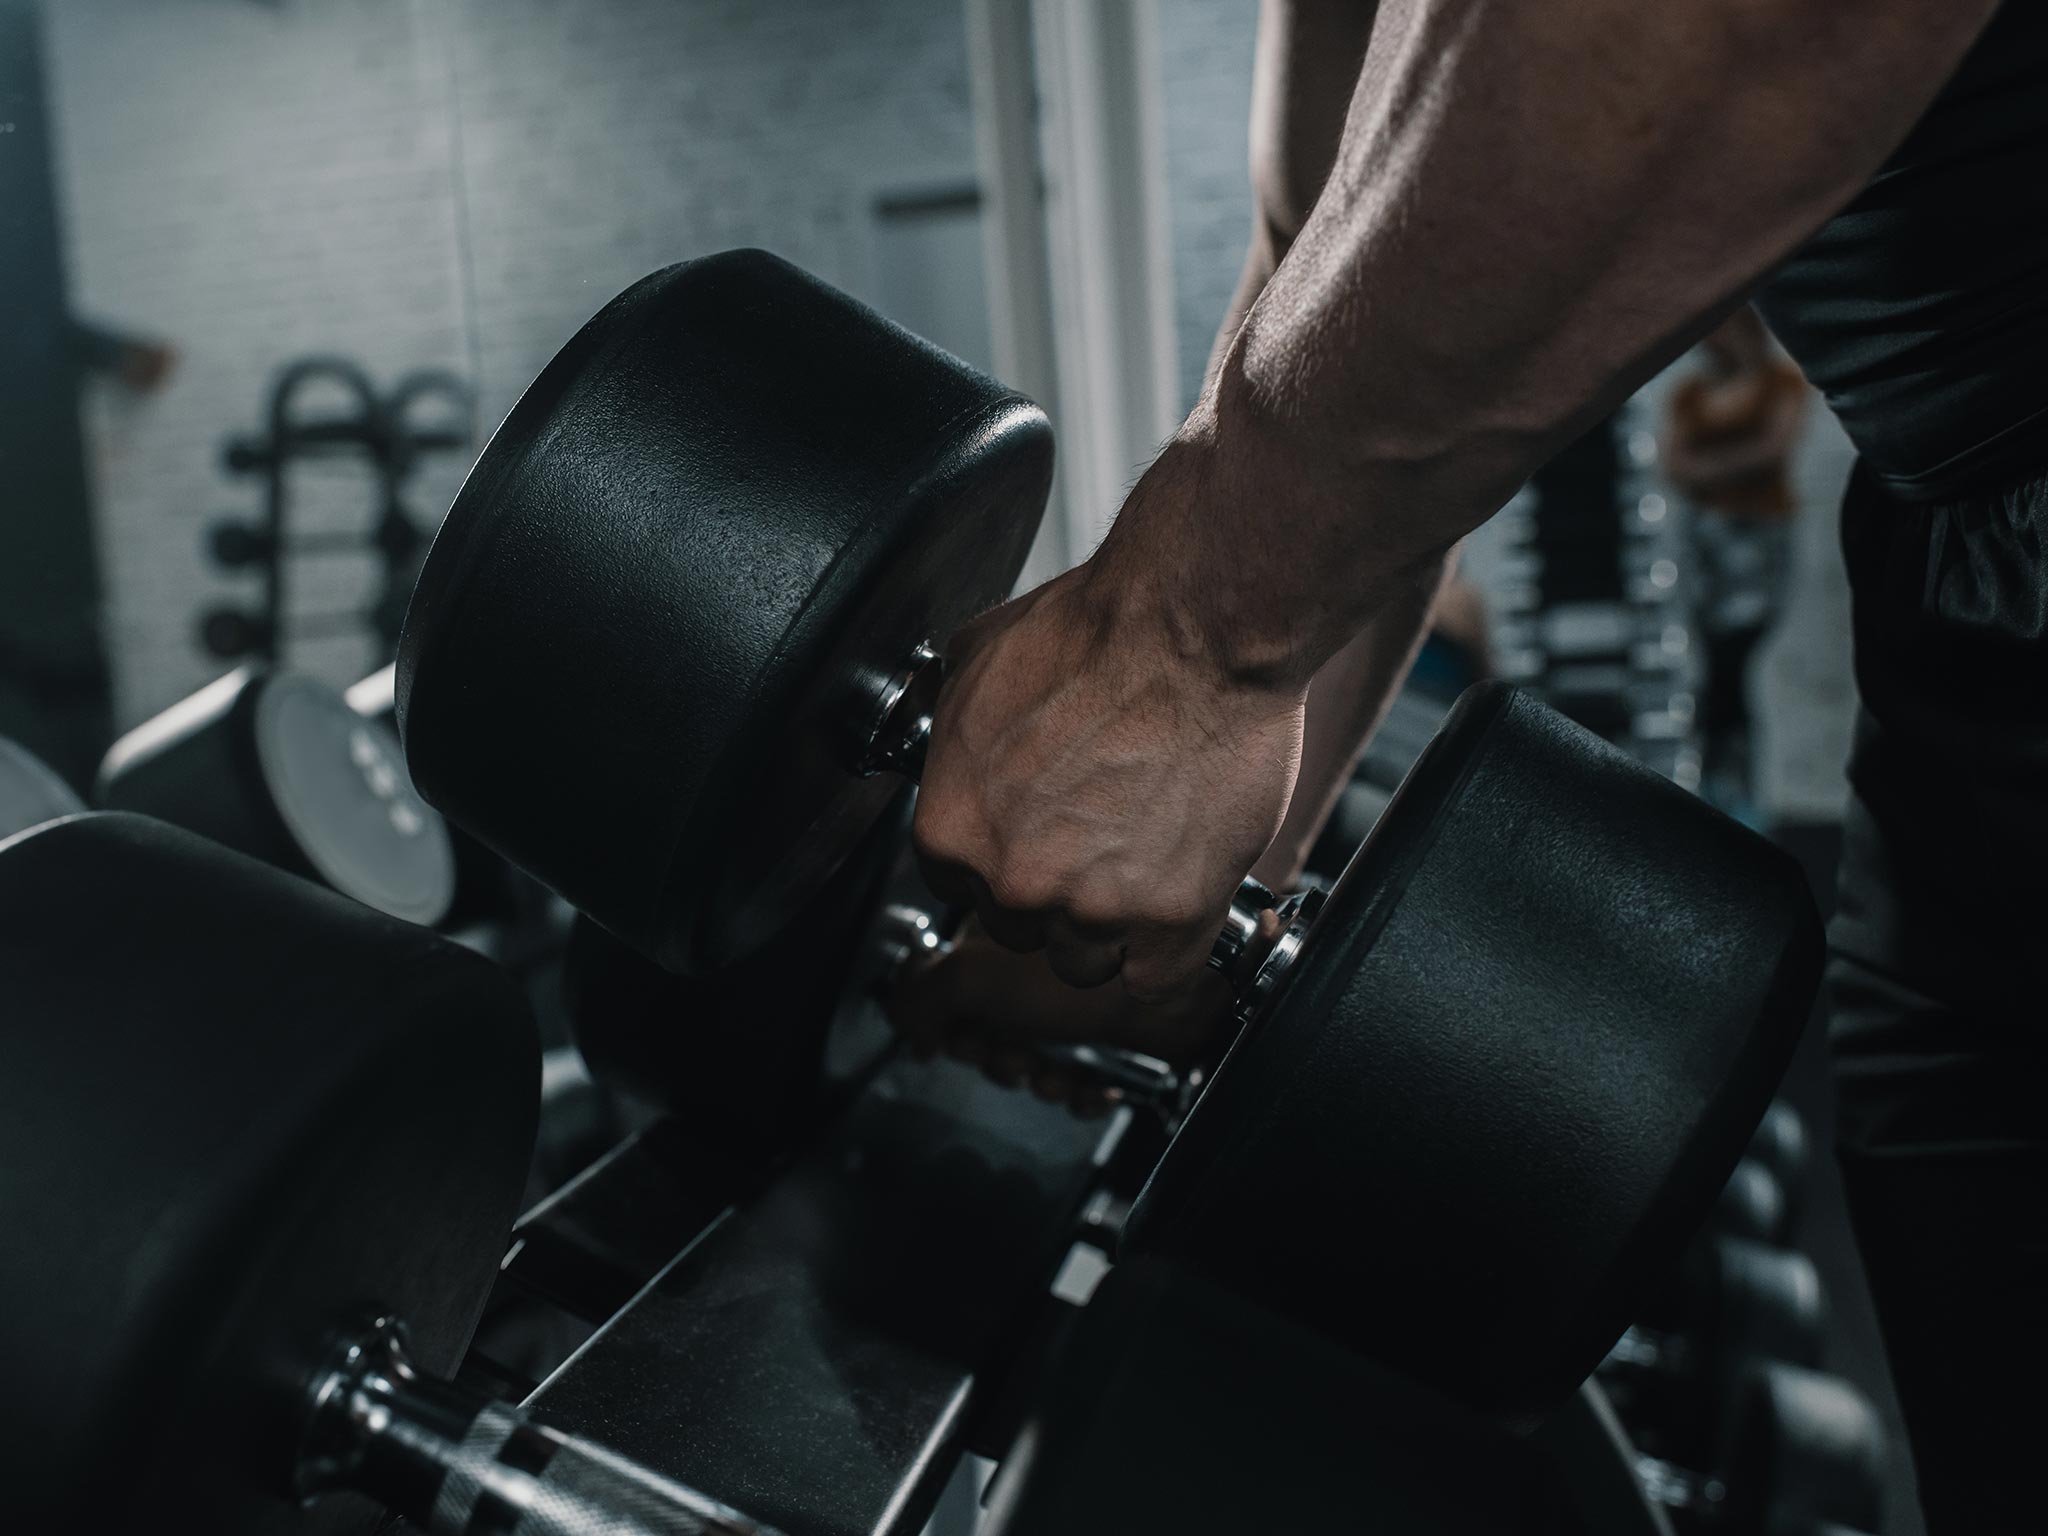 Free Weights vs Machines: Which is Better for Fast Muscle Building?